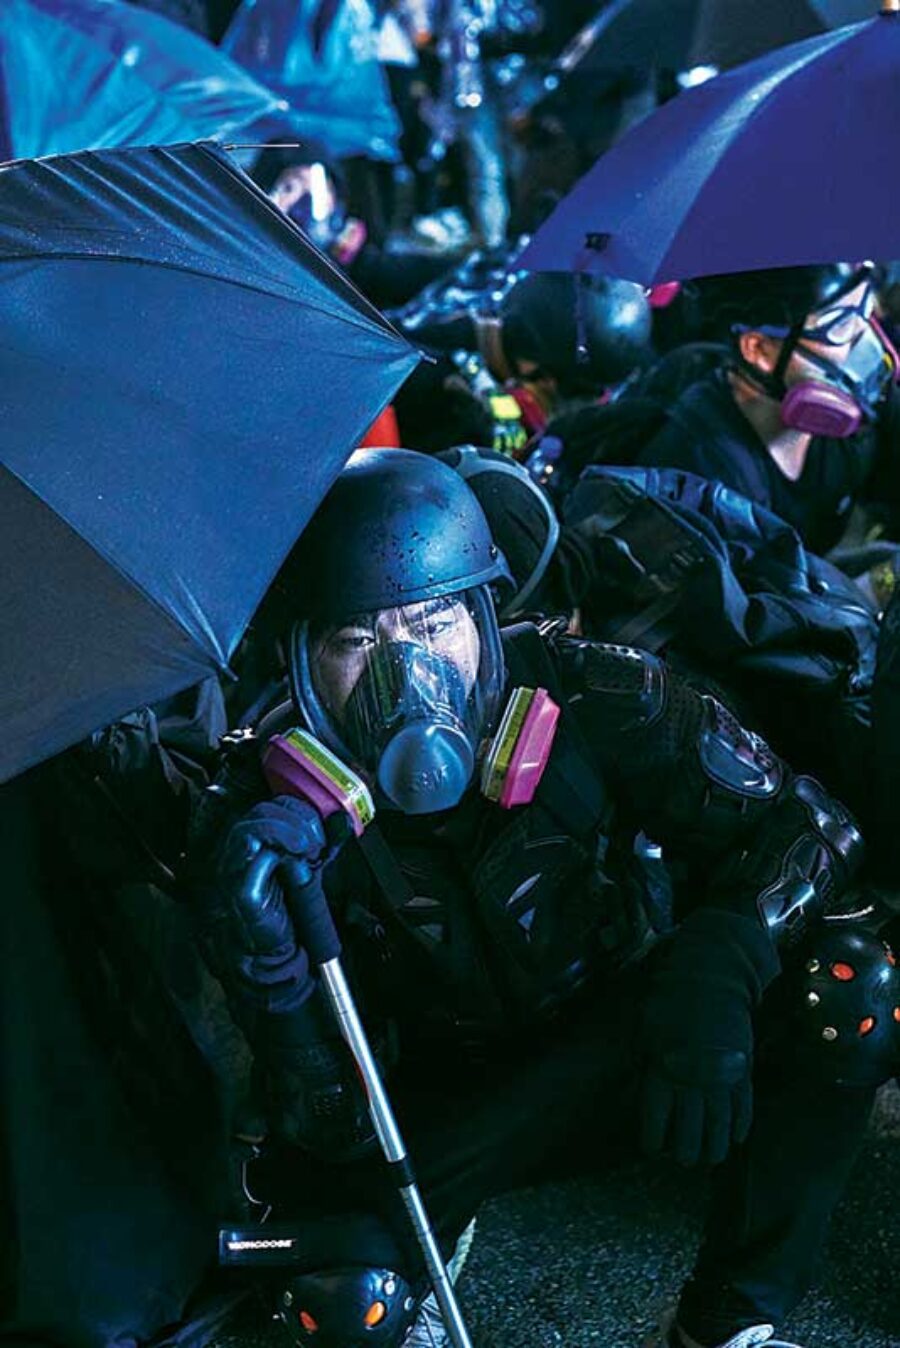 Frontline protesters in Causeway Bay, Hong Kong, August 31, 2019 © An Rong Xu/ Redux.